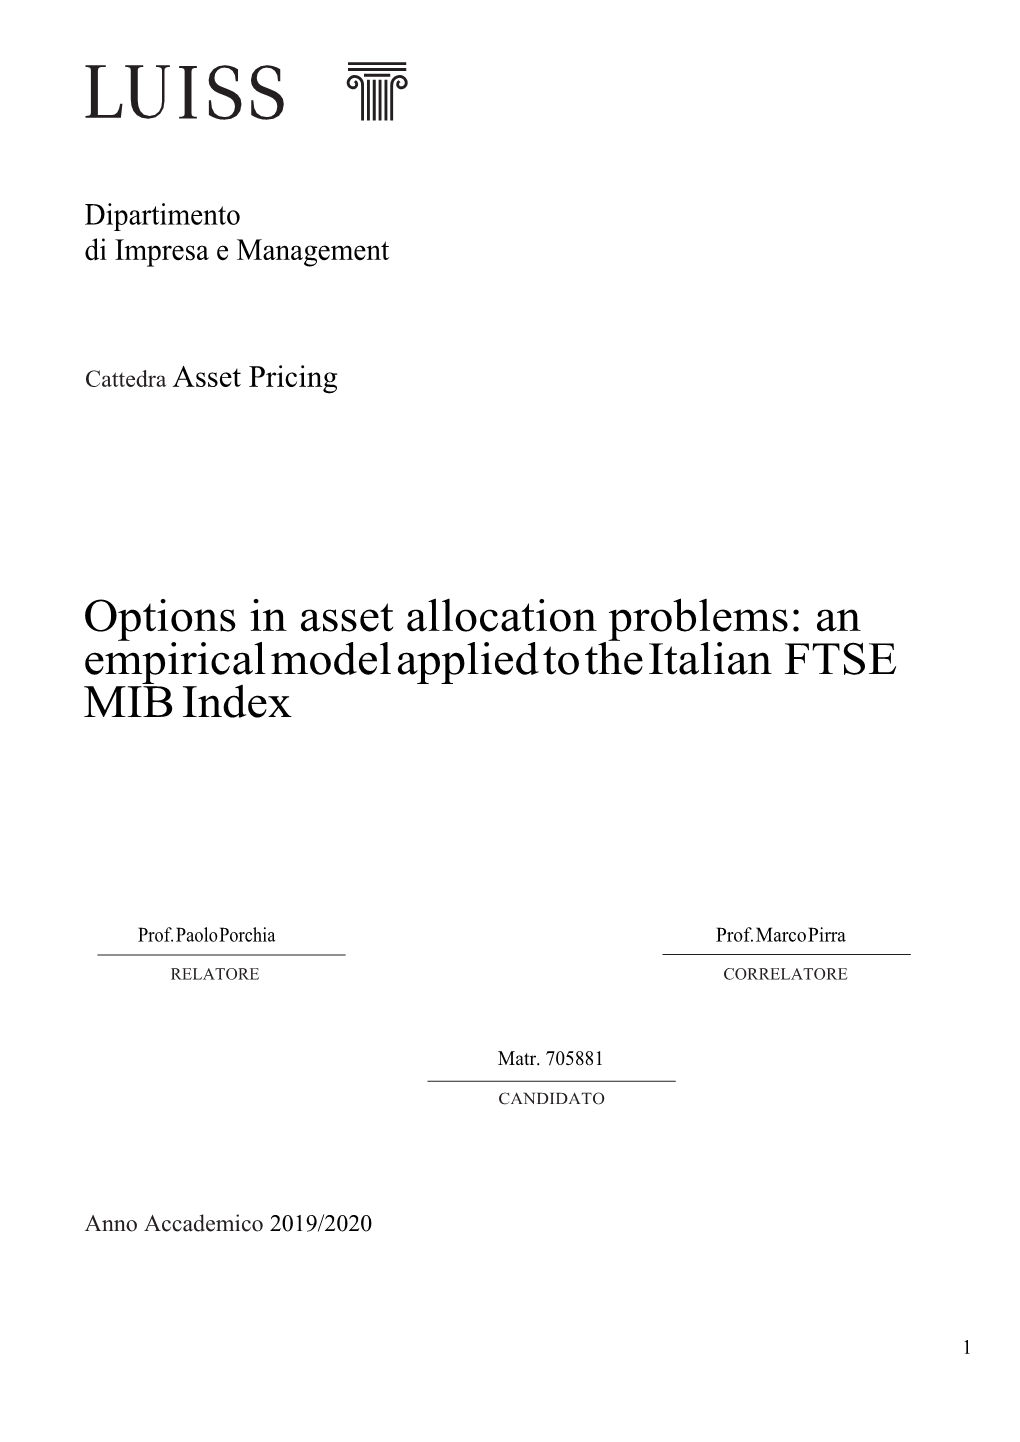 Options in Asset Allocation Problems: an Empirical Model Applied to the Italian FTSE MIB Index